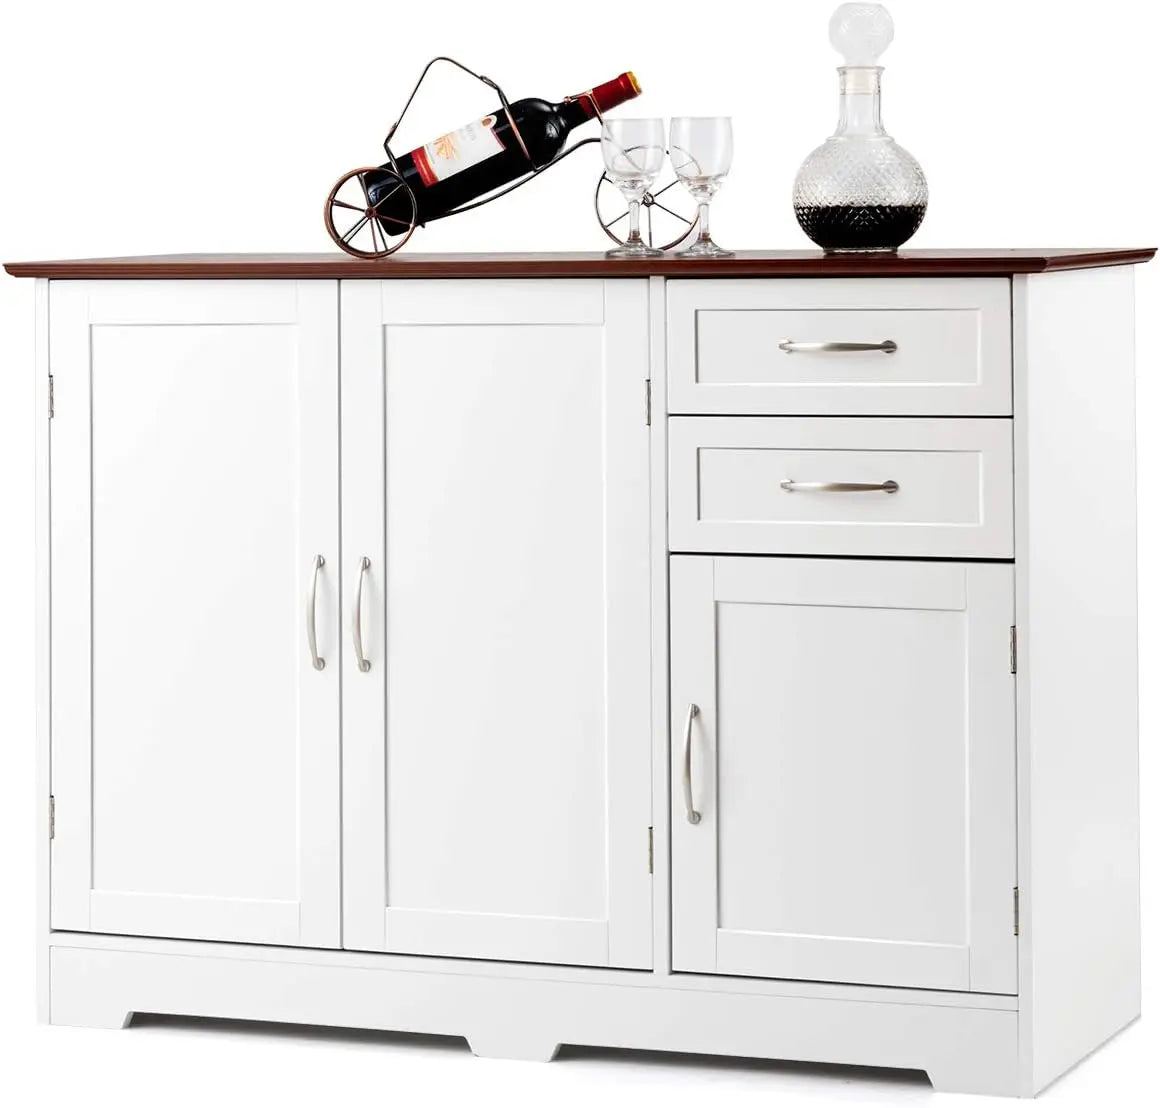 Buffet Sideboard Storage Credenza Cabinet Console Table Kitchen Dining Room Furniture Organizer Cupboard with Door and Drawers